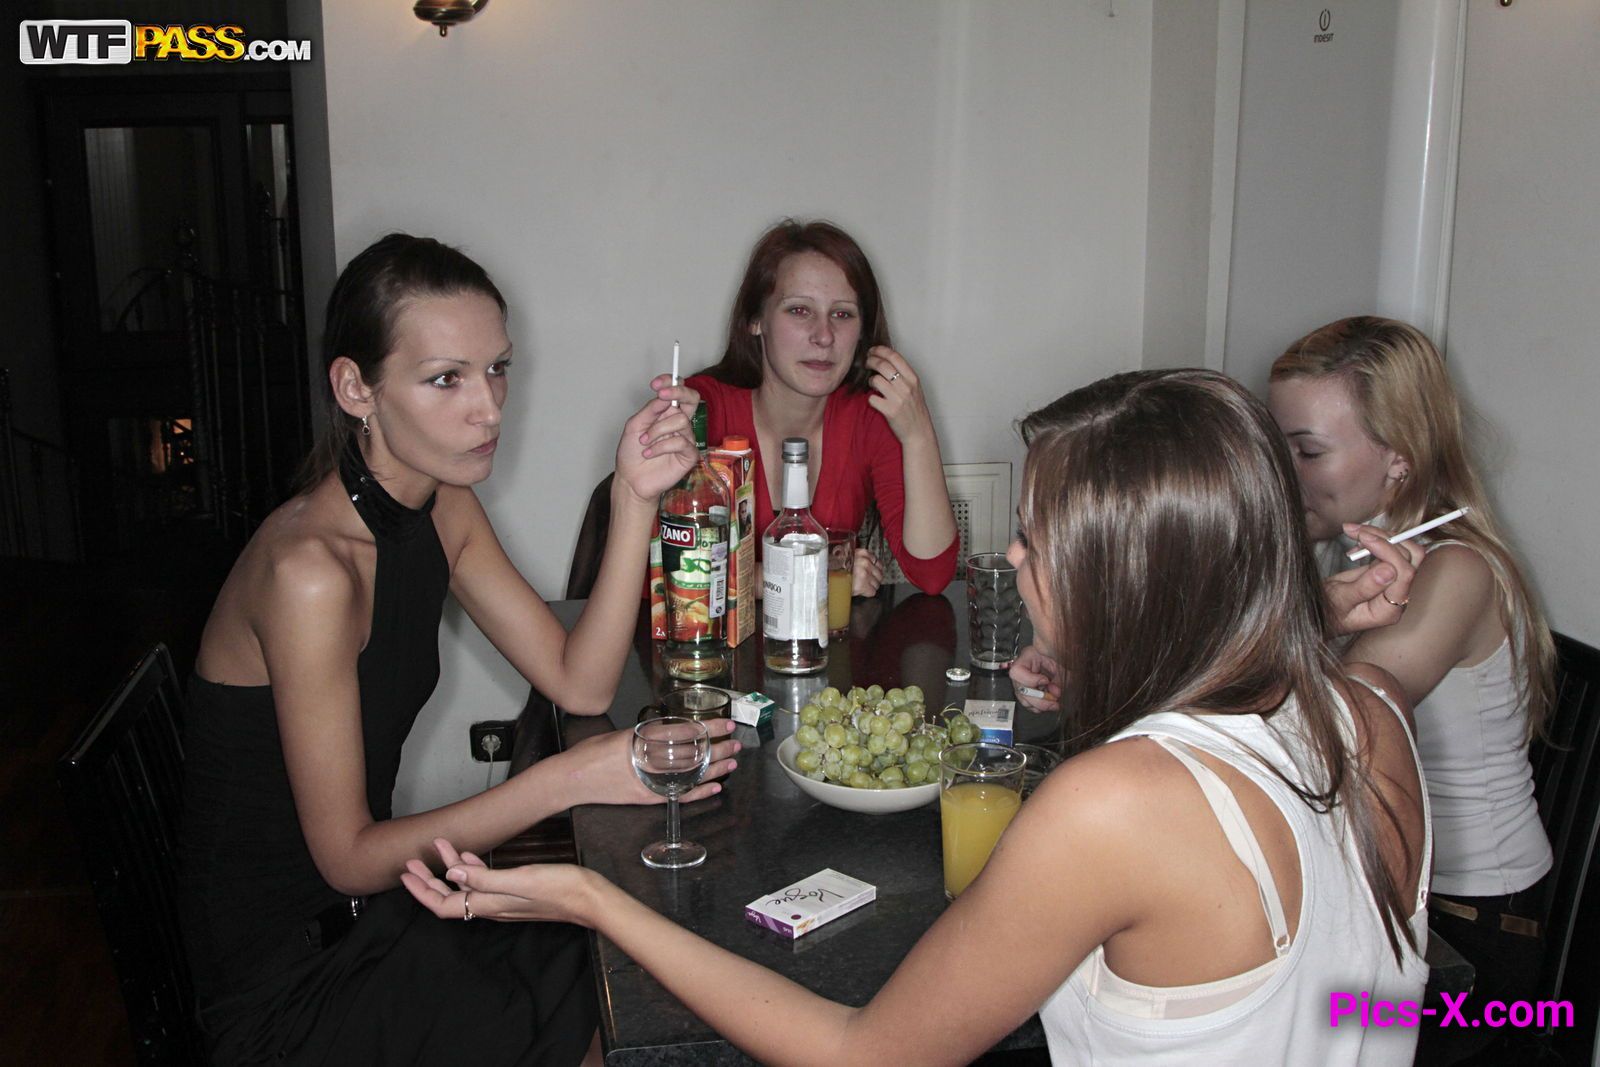 Real college sex on weekend, part 7 - College Fuck Parties - Image 1